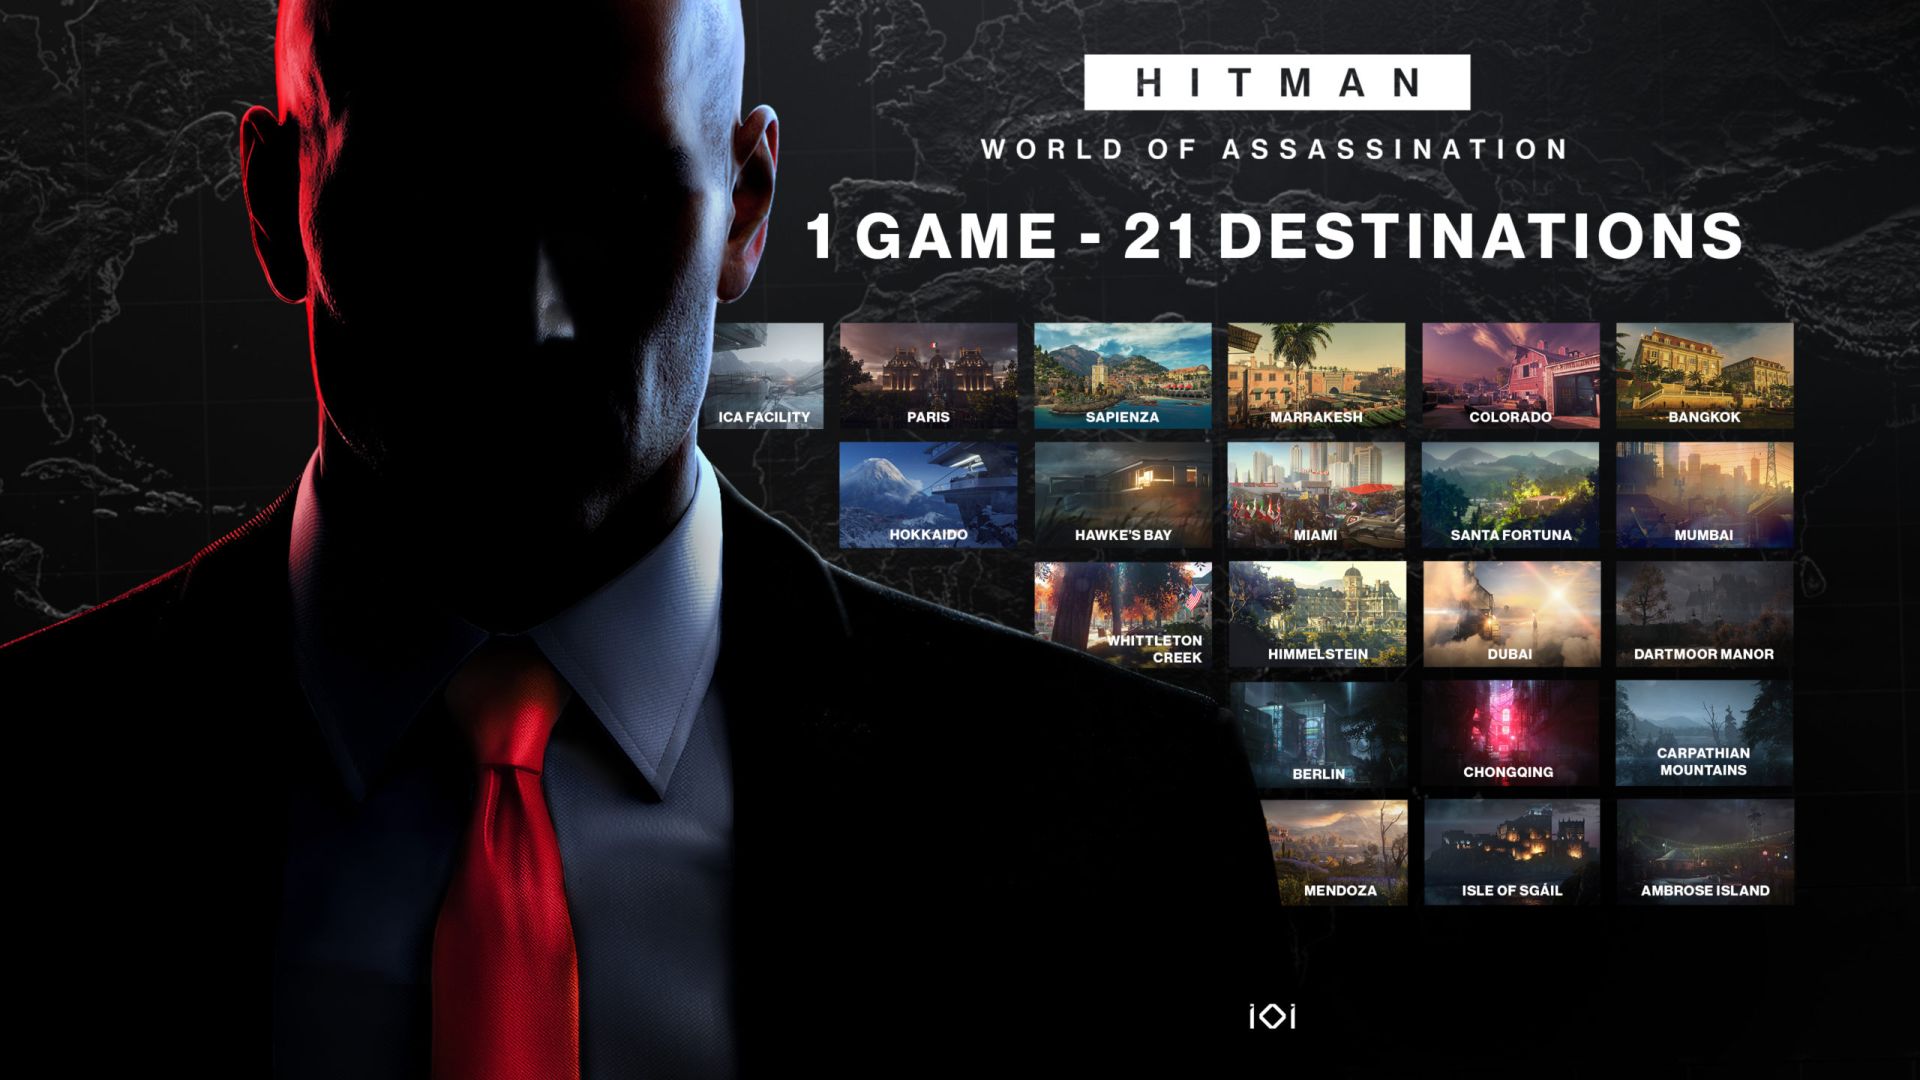 Hitman 3 roadmap introduces a new Elusive Target and free